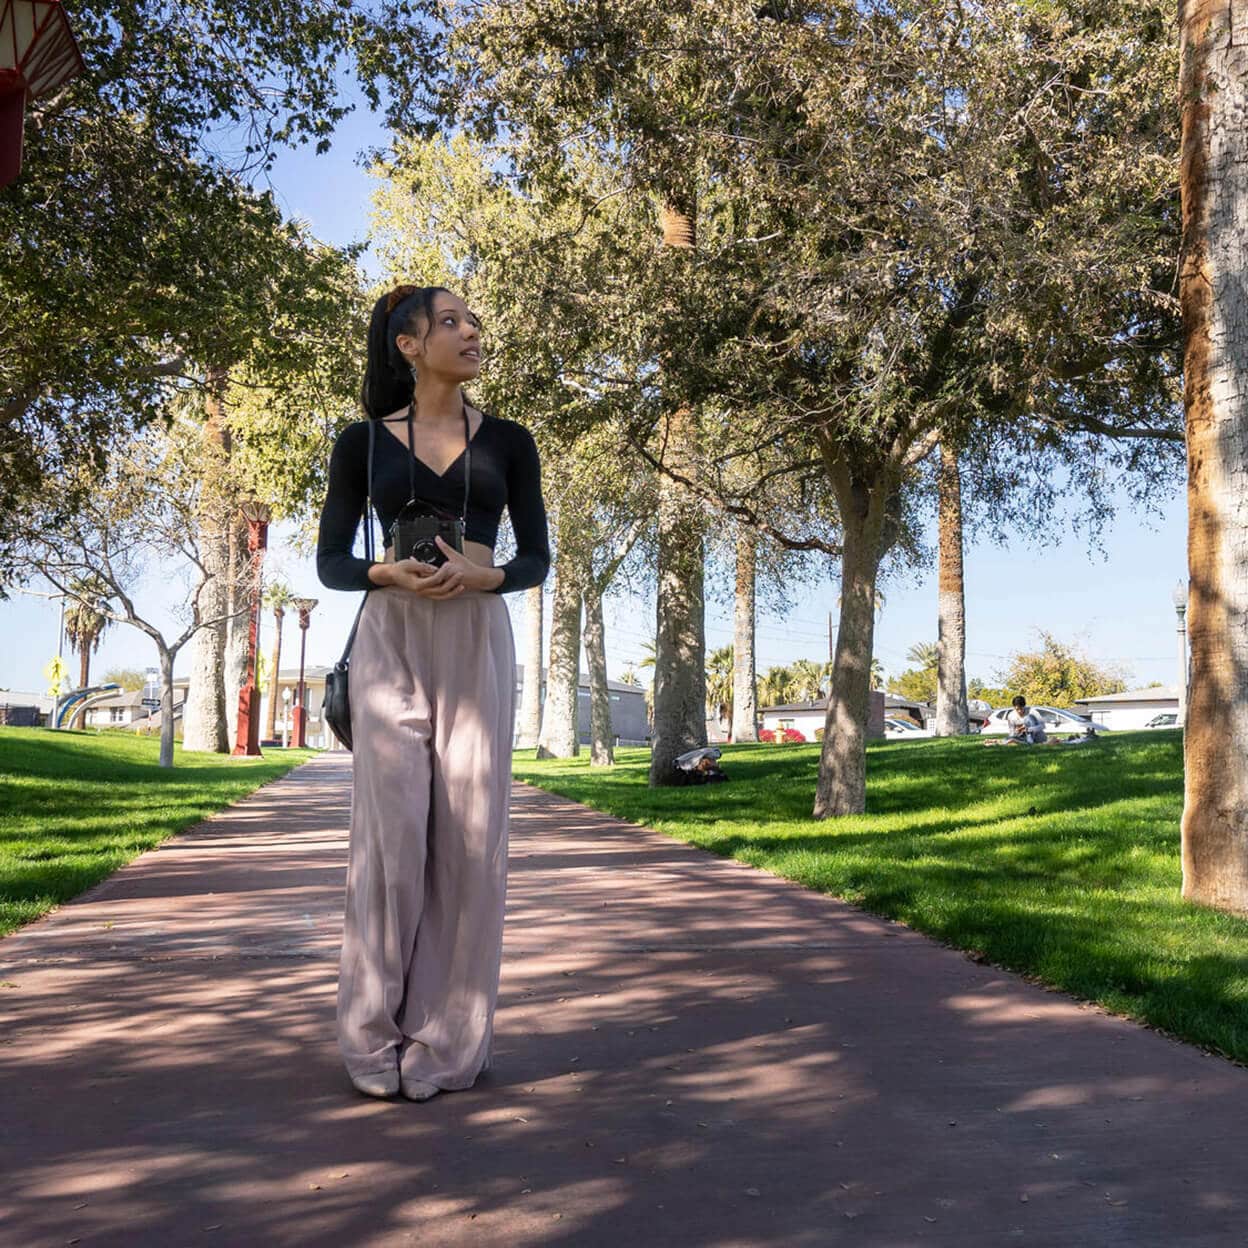 A young woman walks in a park.